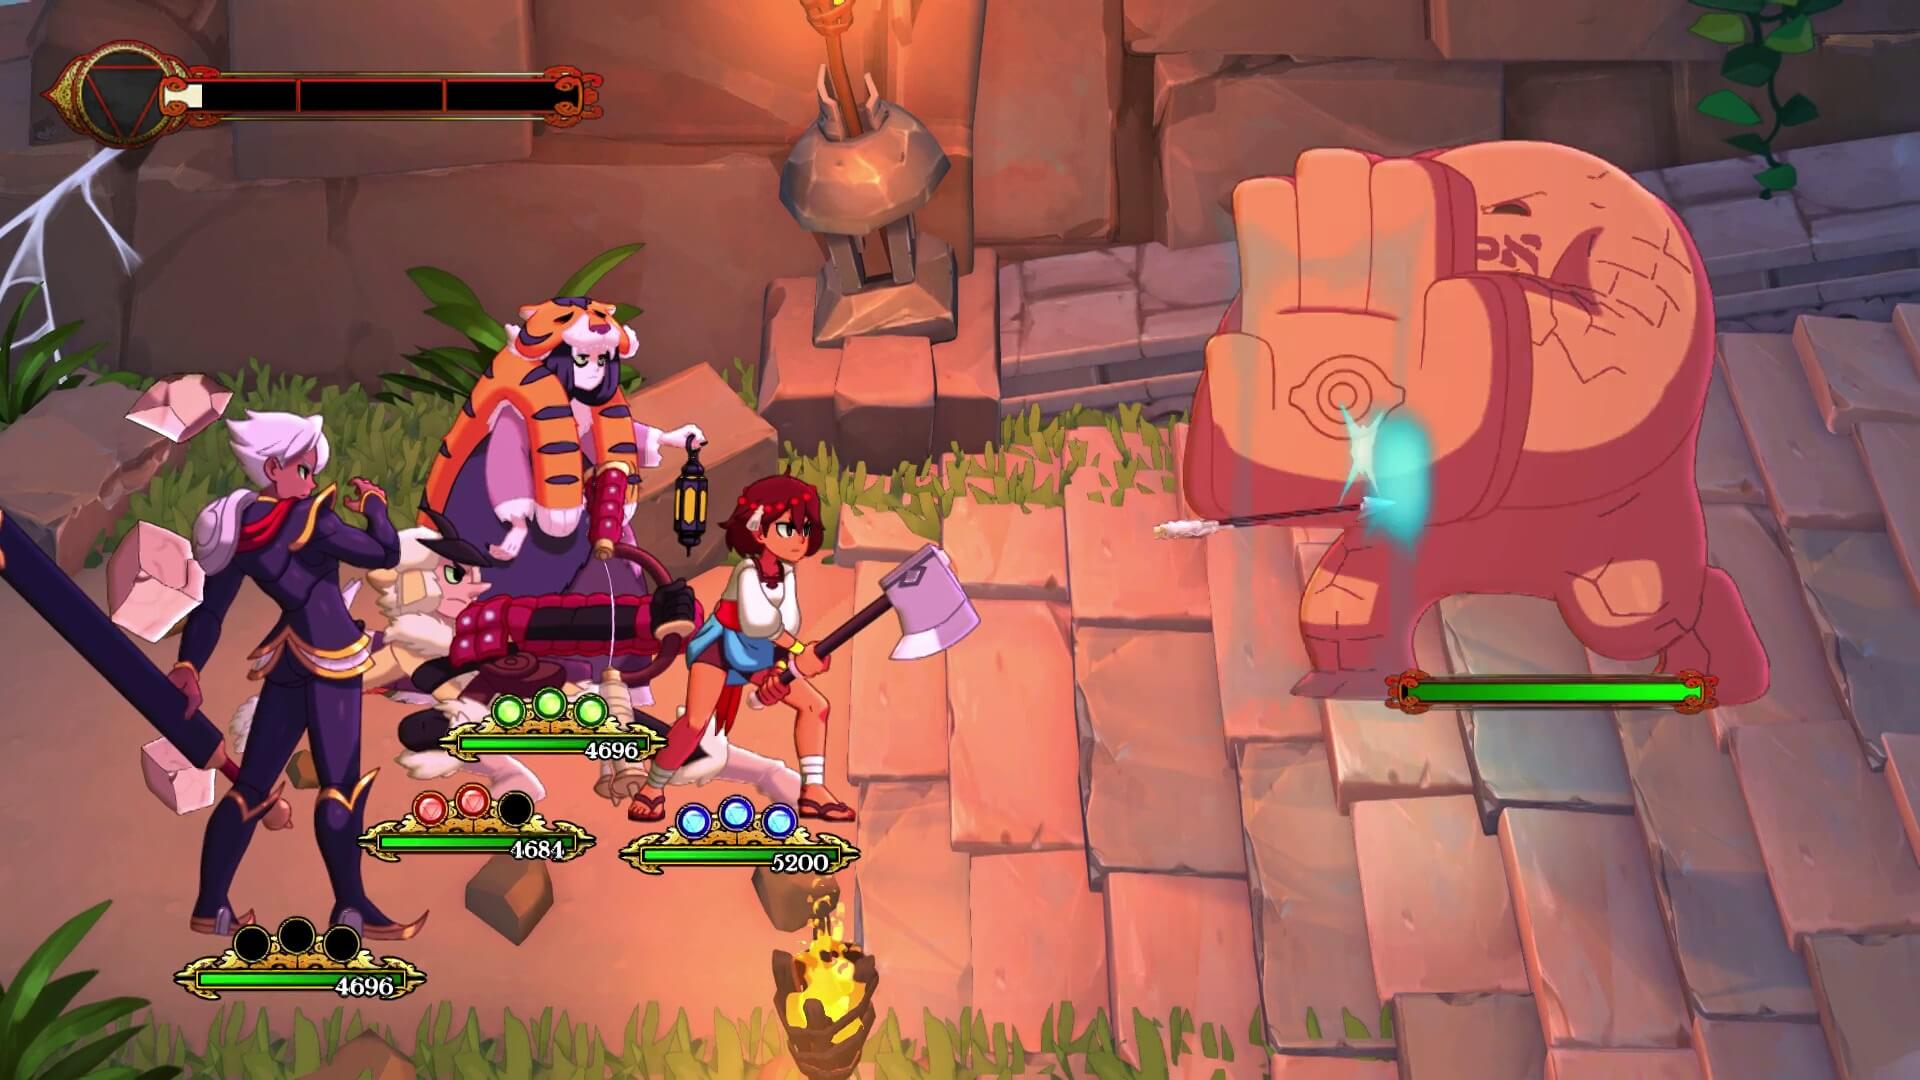 Indivisible, a game by Lab Zero Games